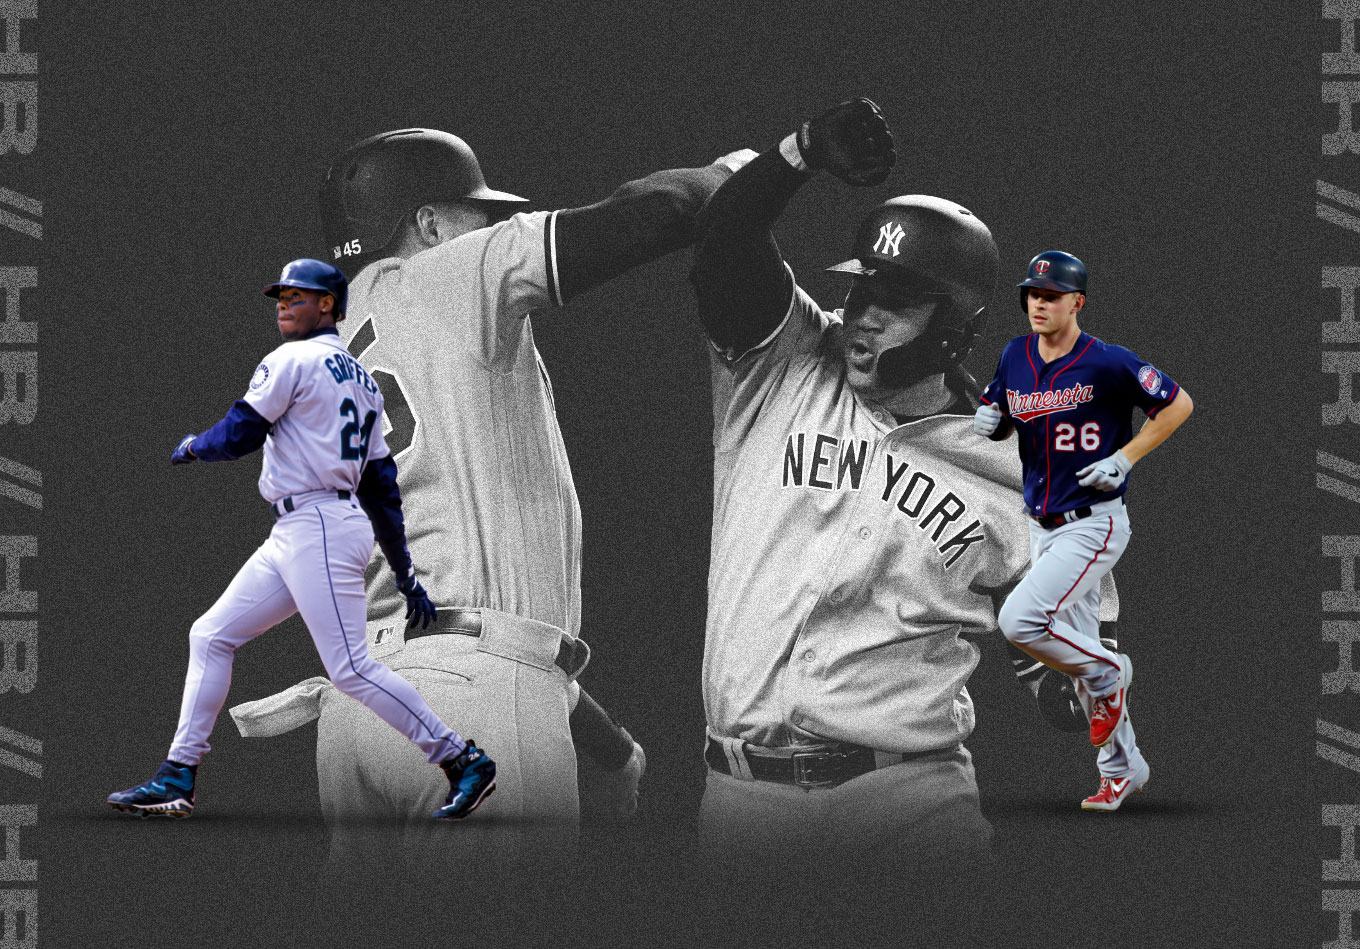 Going, Going, Gone: The Most Home Runs in a Season, Postseason and Career